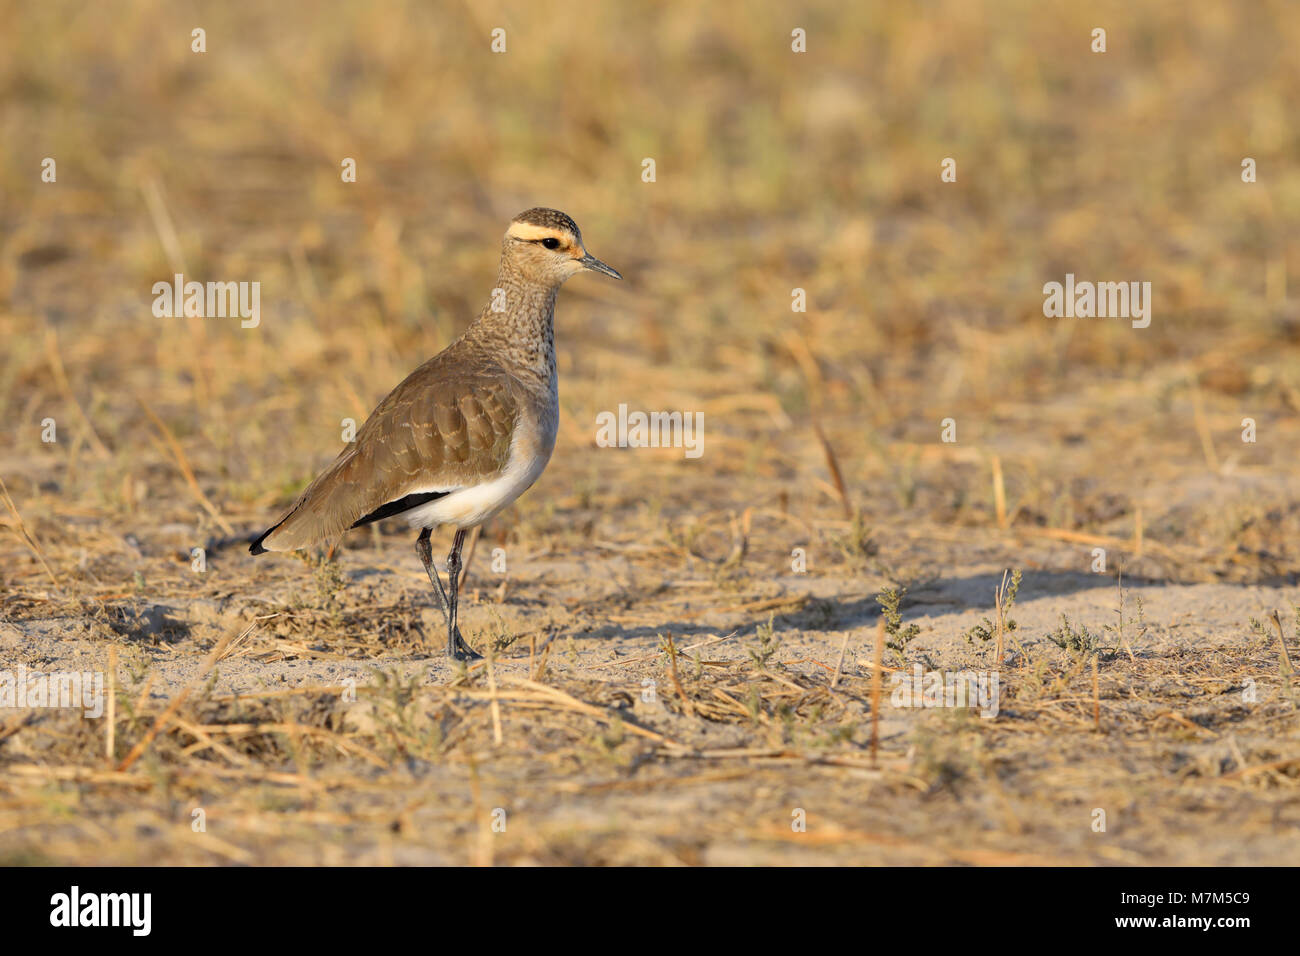 Sociable Lapwing or Sociable Plover (Vanellus gregarius) adult in non-breeding plumage in the Kutch area of Gujarat, India Stock Photo